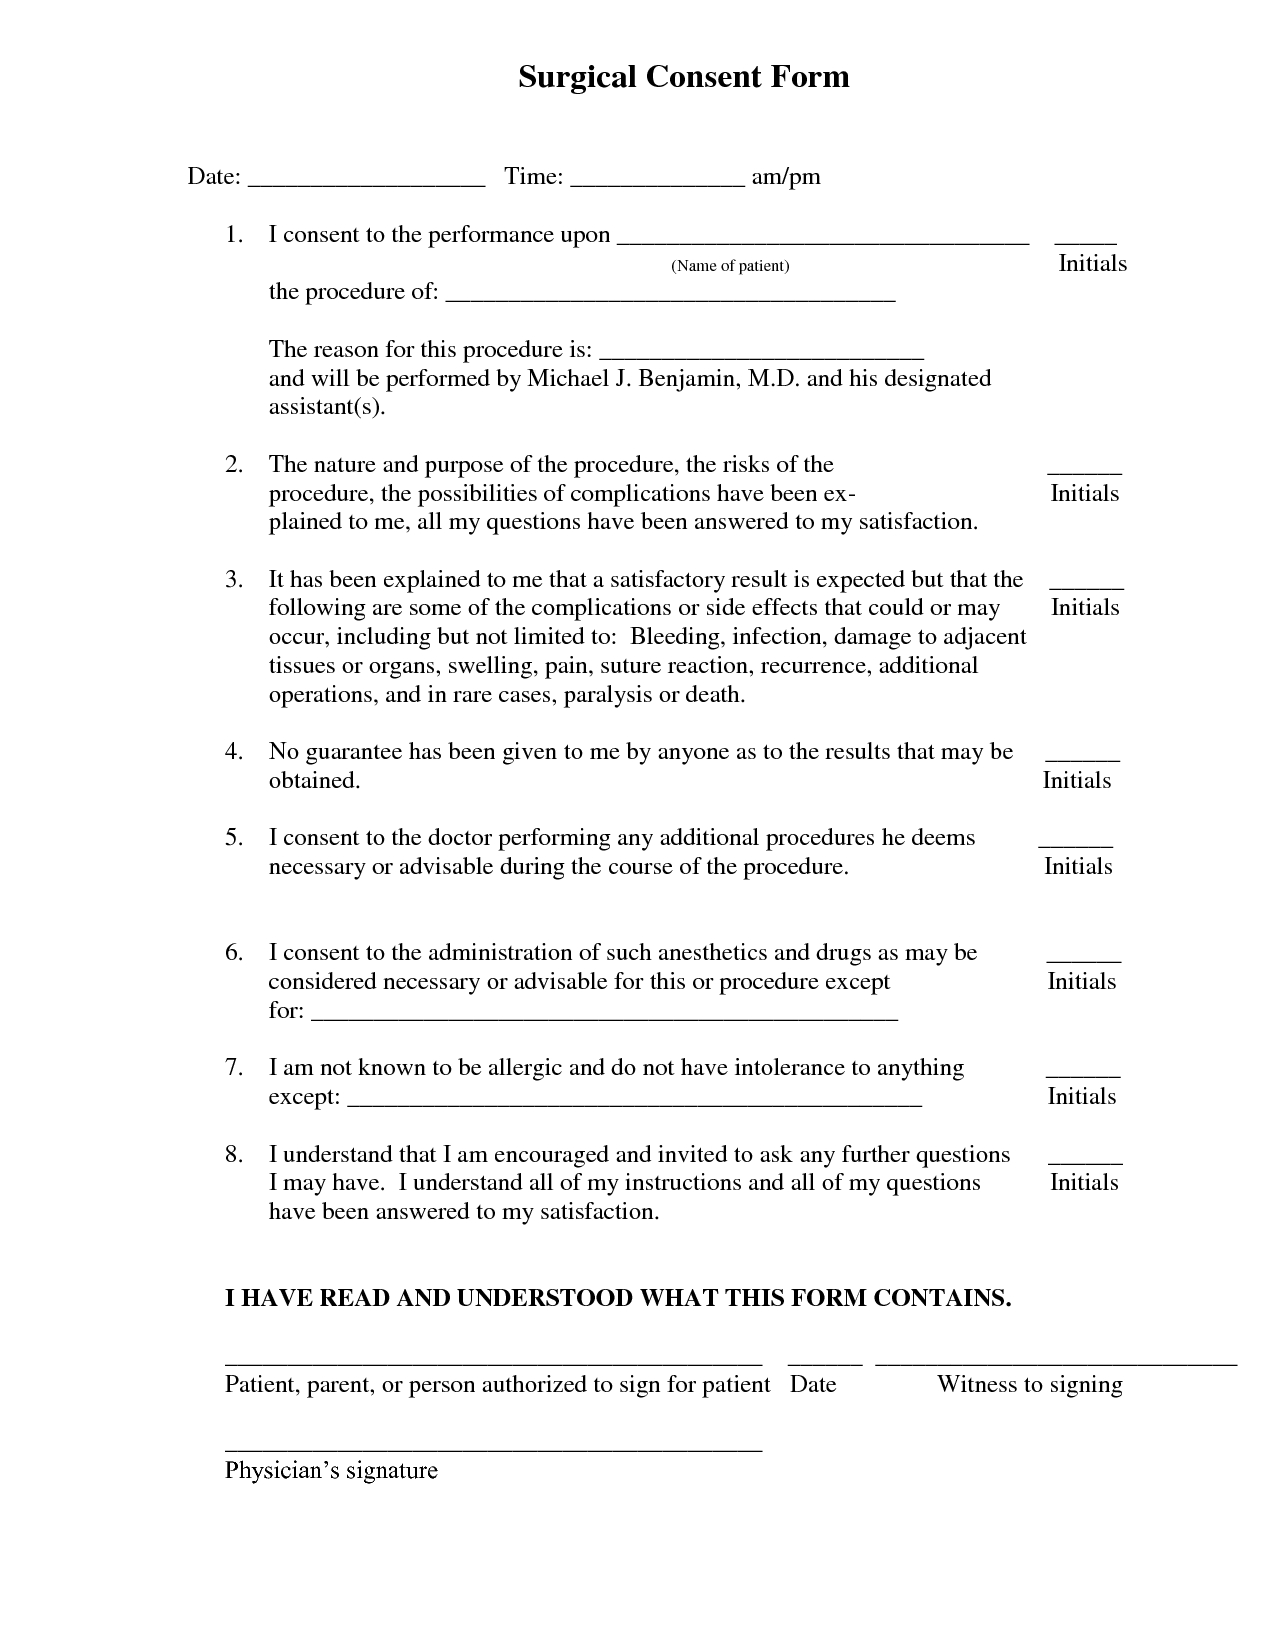 Medical Consent Letter Template - Surgical Consent form Template Consent form Pinterest